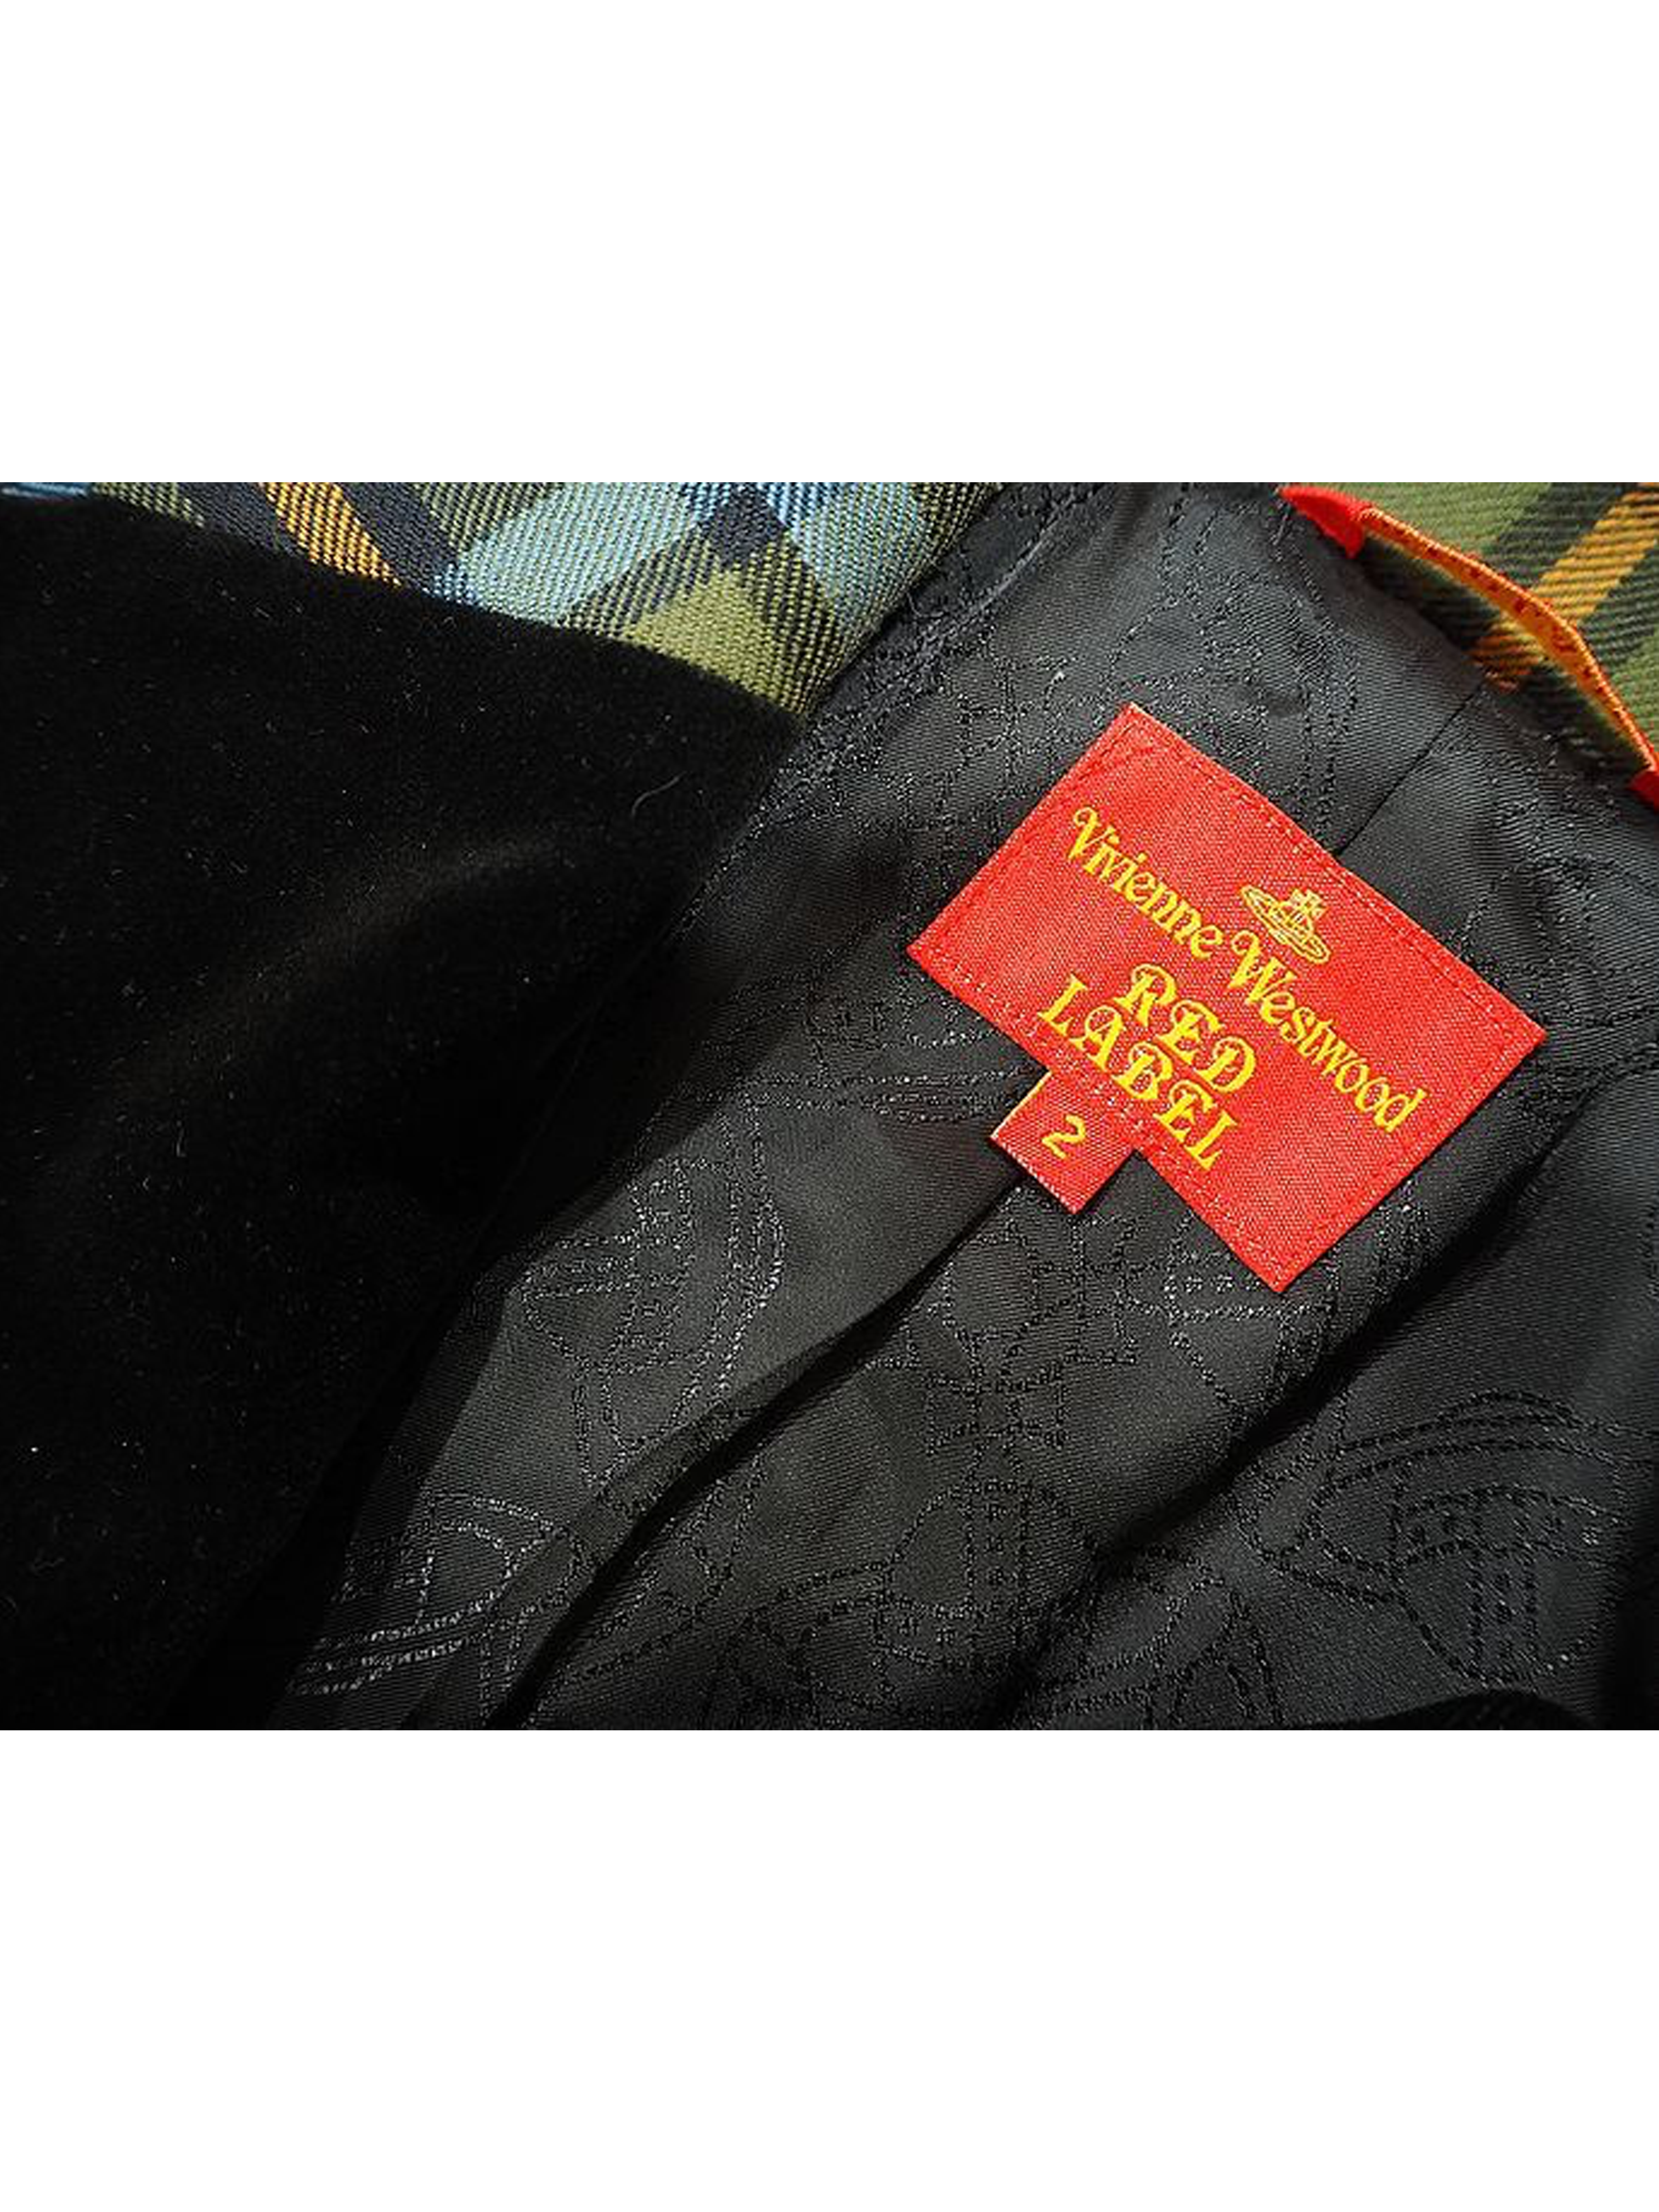 Vivienne Westwood 1994 Velour Switching Check Love Jacket